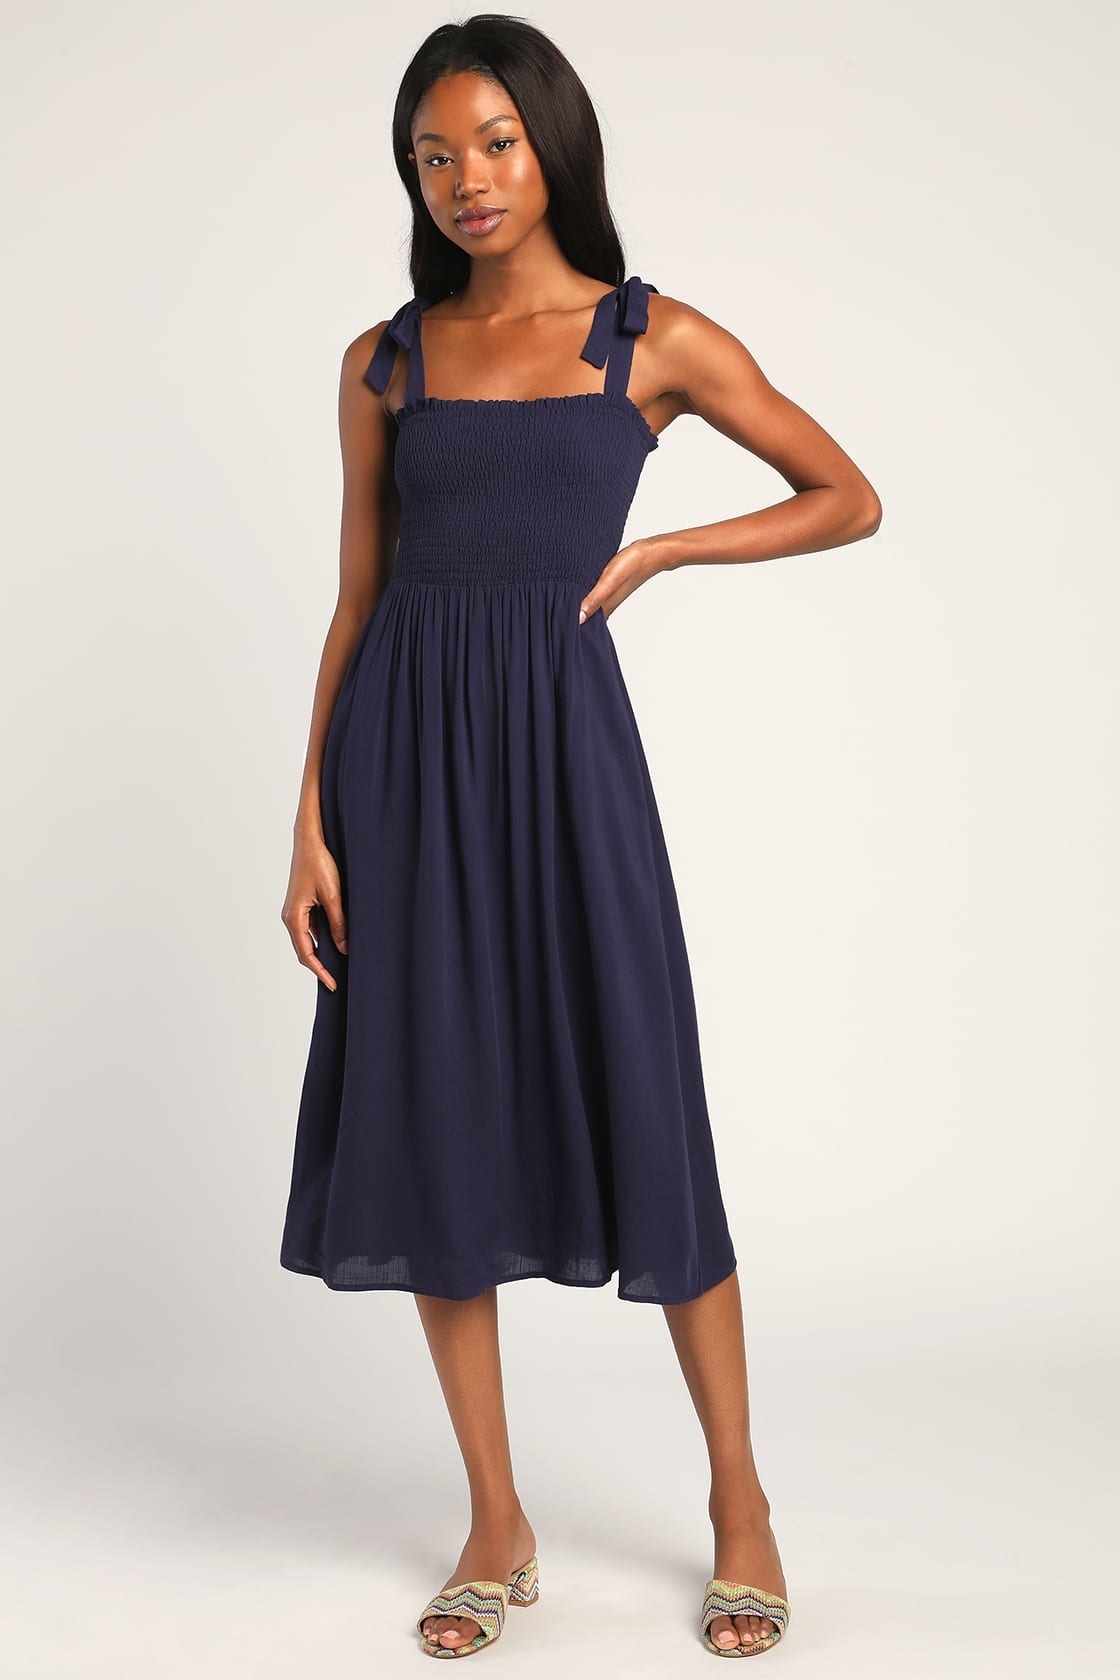 model in navy blue midi dress with smocked top and narrow tie straps